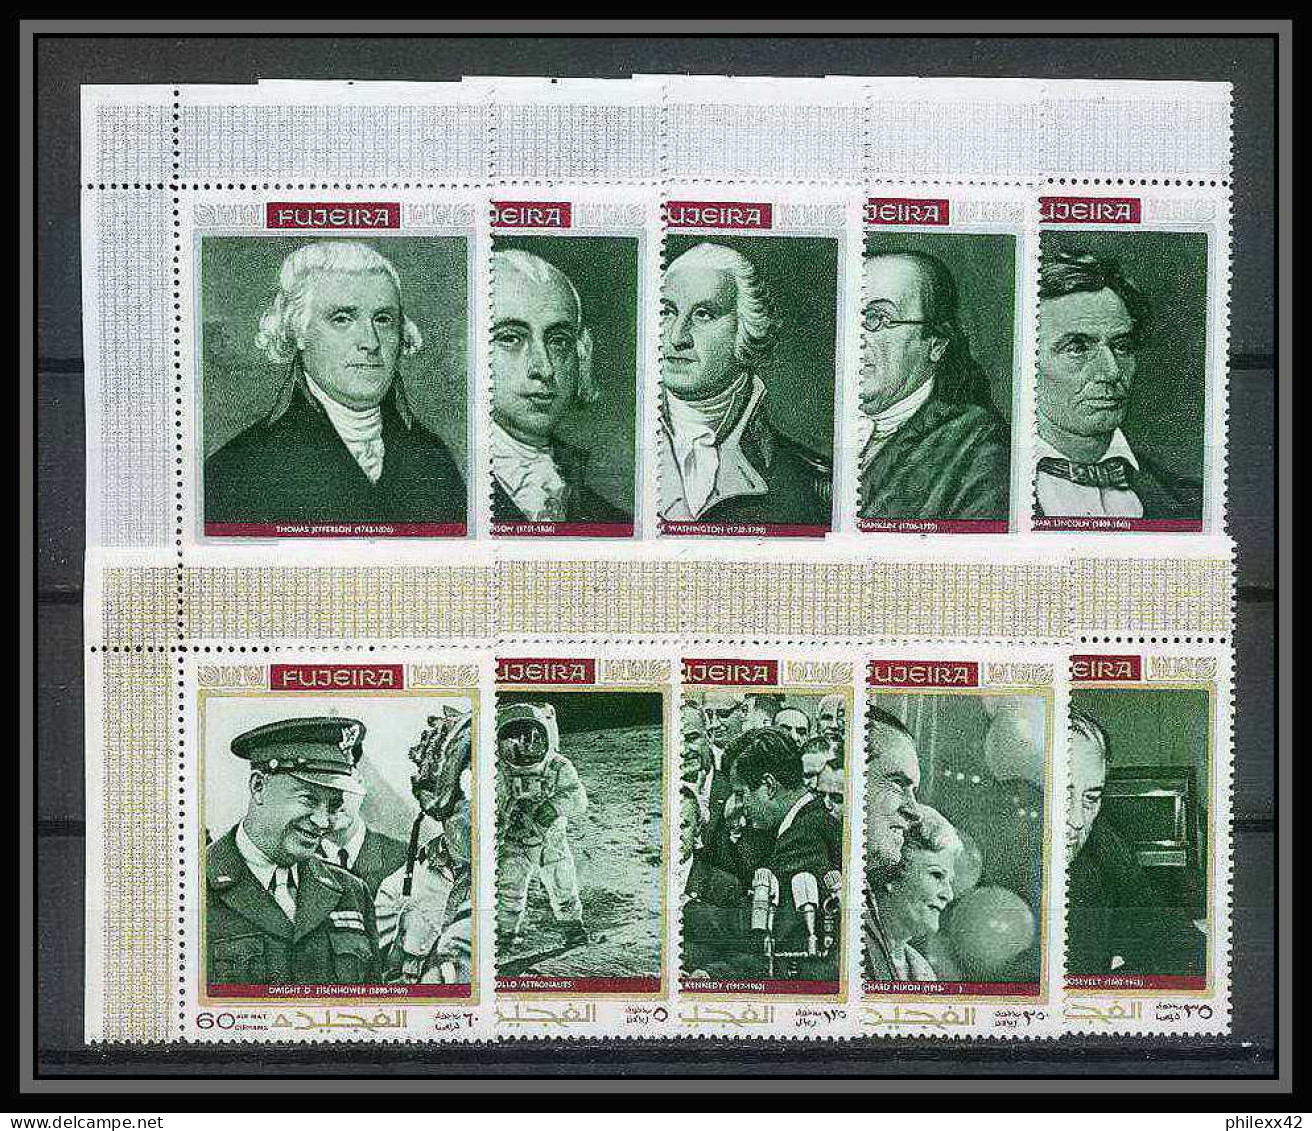 364 Fujeira MNH ** Mi N° 485 / 494 A Personalities From American History Espace (space) Kennedy Armstrong Lincoln Nixon - Unabhängigkeit USA